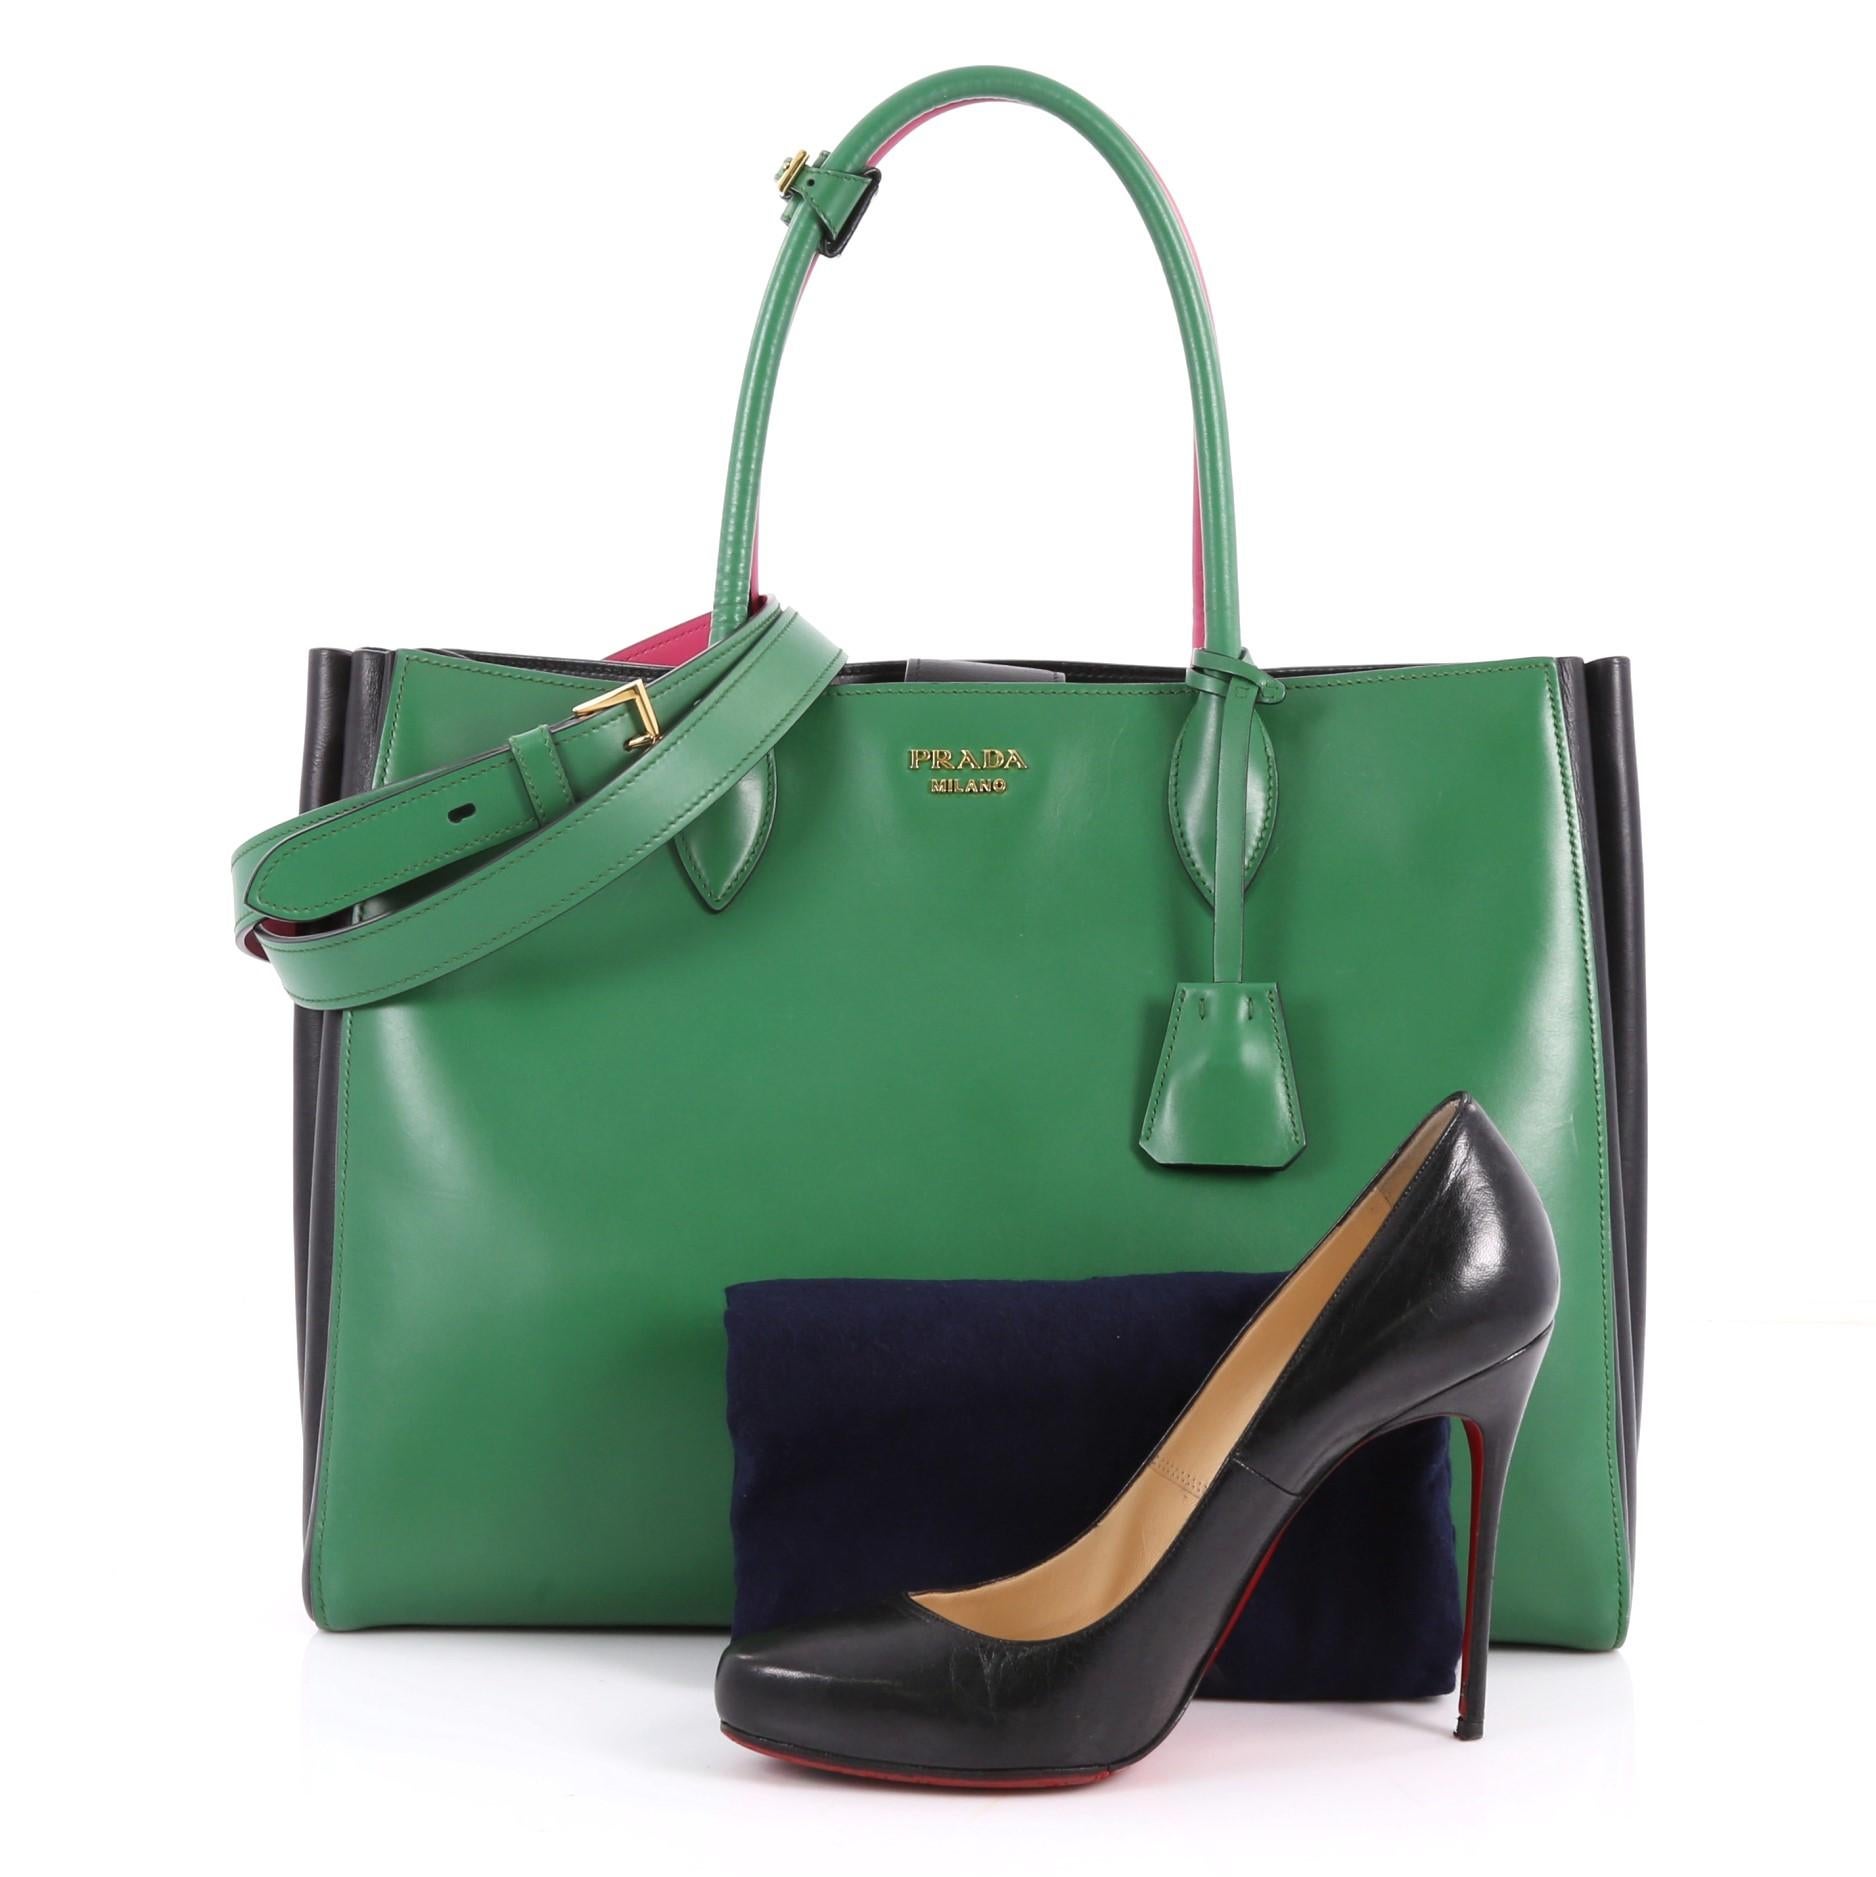 This authentic Prada Soft Bibliotheque Handbag City Calfskin Large is a mark of Prada's fine craftsmanship that is elegant in its simplicity and structure. Crafted from green, black, pink and white calfskin leather, this tote features dual-rolled